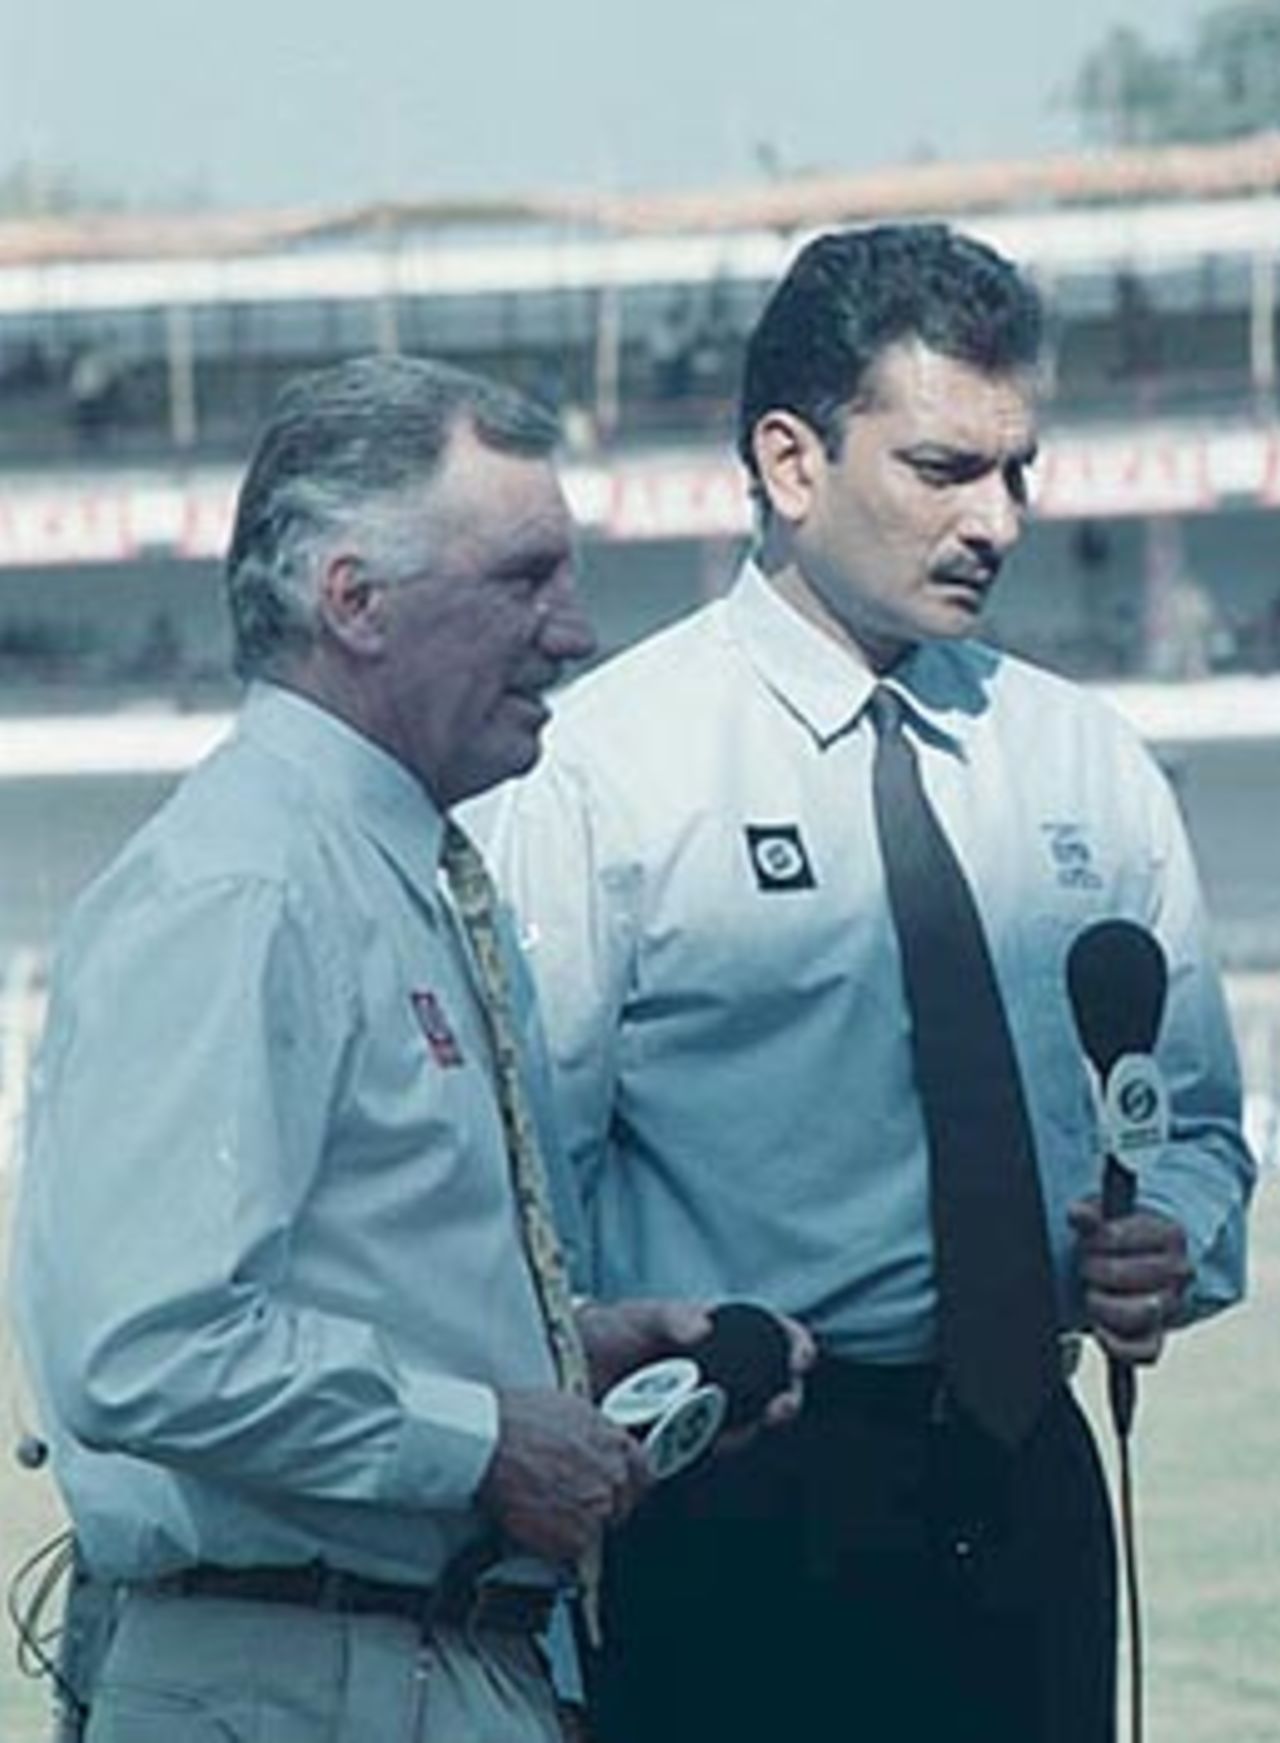 Ian Chappell and Ravi Shastri at the ground as part of the television crew. Zimbabwe in India 2000/01, 2nd Test, India v Zimbabwe Vidarbha C.A. Ground, Nagpur, 25-29 November 2000 (Day 1)